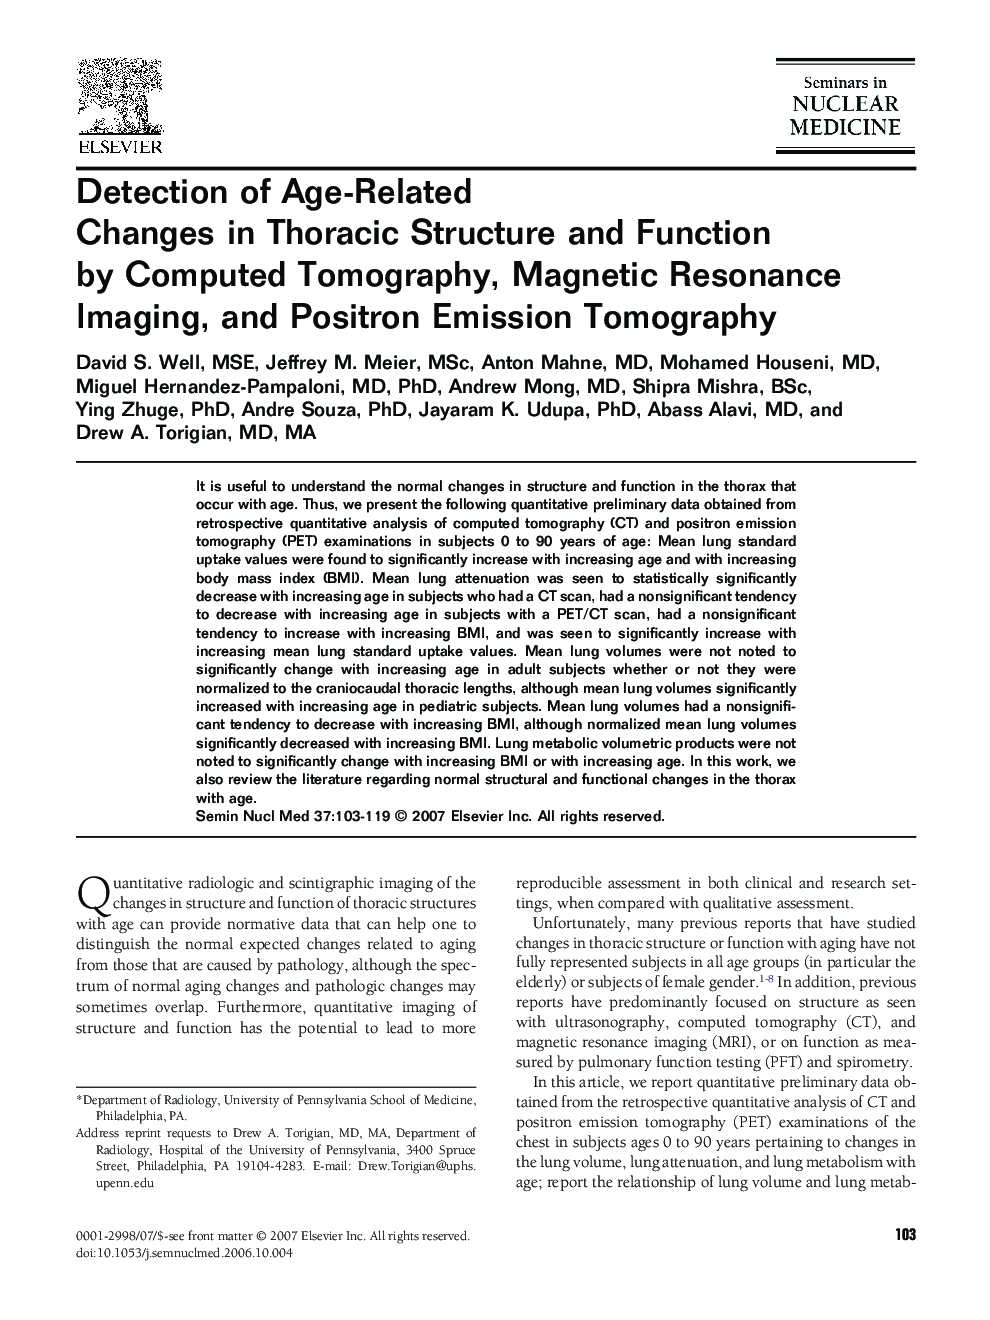 Detection of Age-Related Changes in Thoracic Structure and Function by Computed Tomography, Magnetic Resonance Imaging, and Positron Emission Tomography